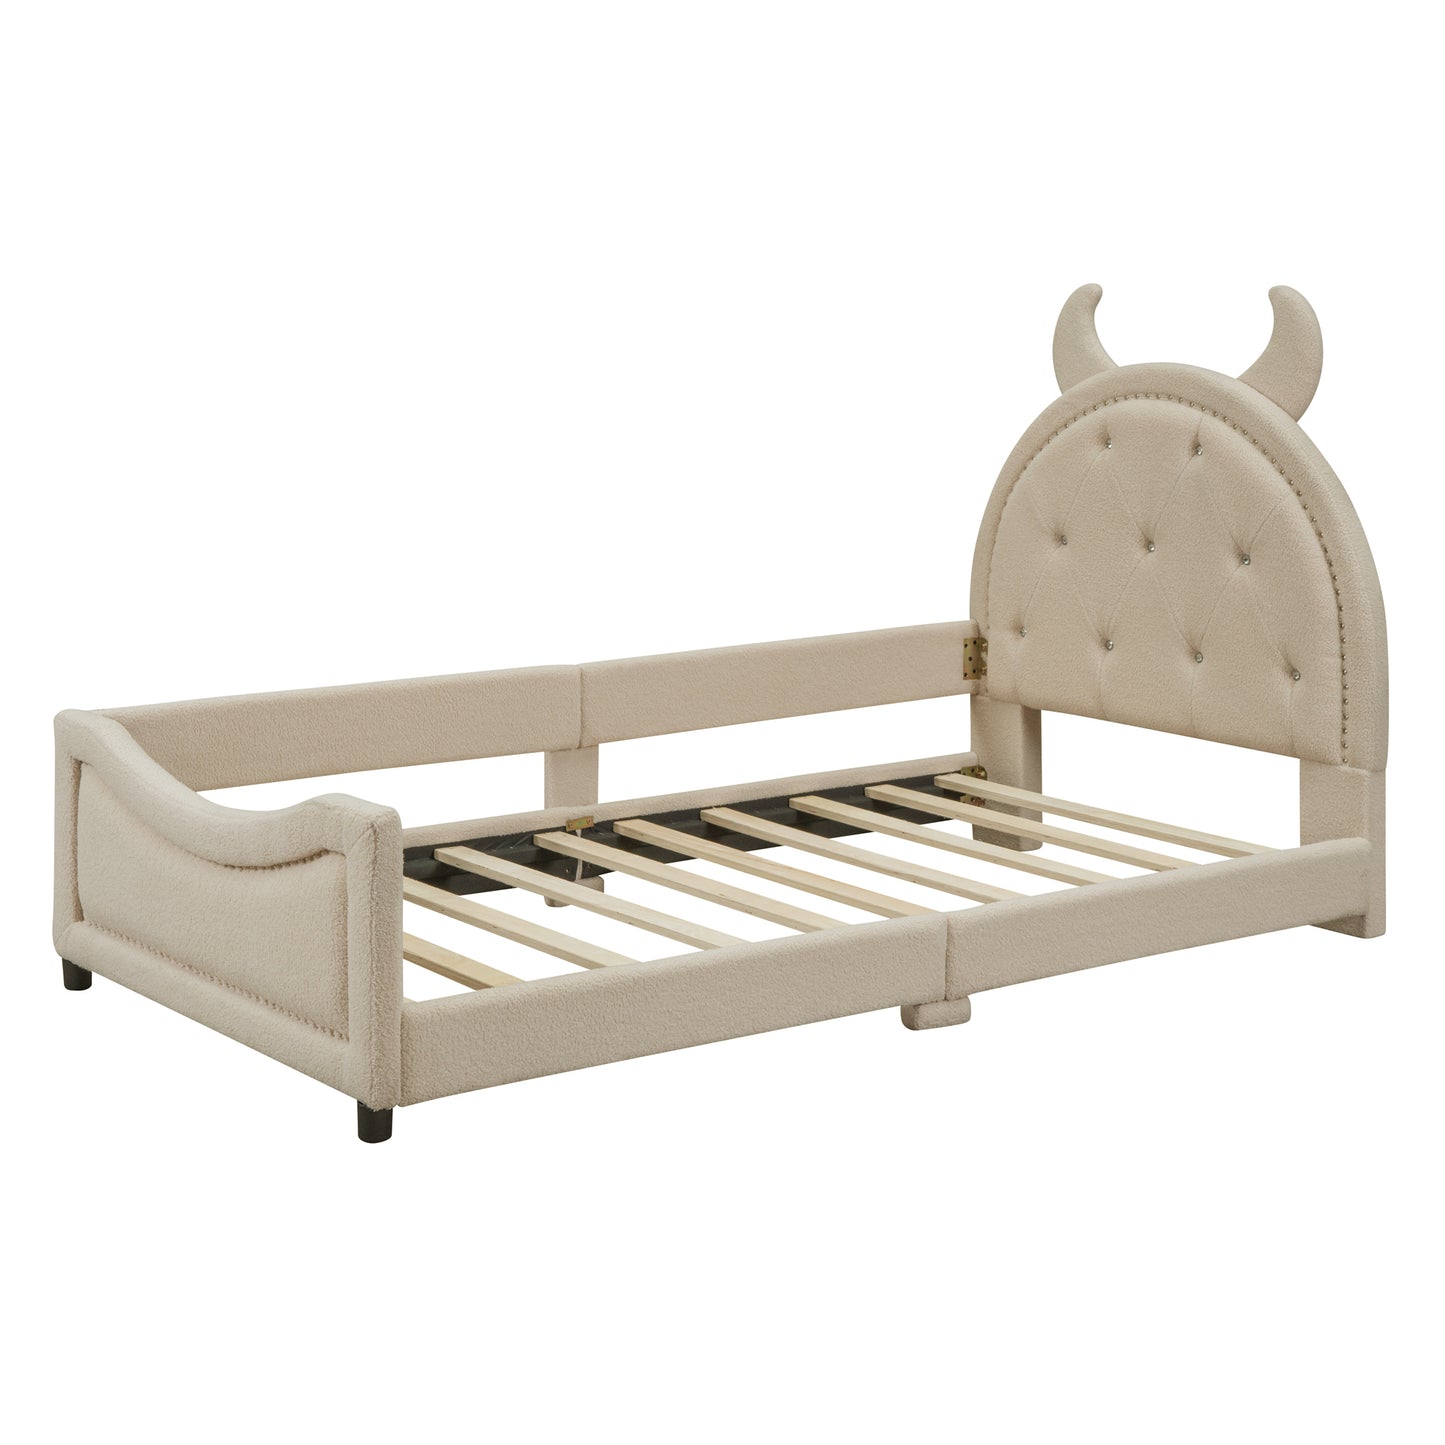 Teddy Fleece Twin Size Upholstered Daybed with OX Horn Shaped Headboard, Beige